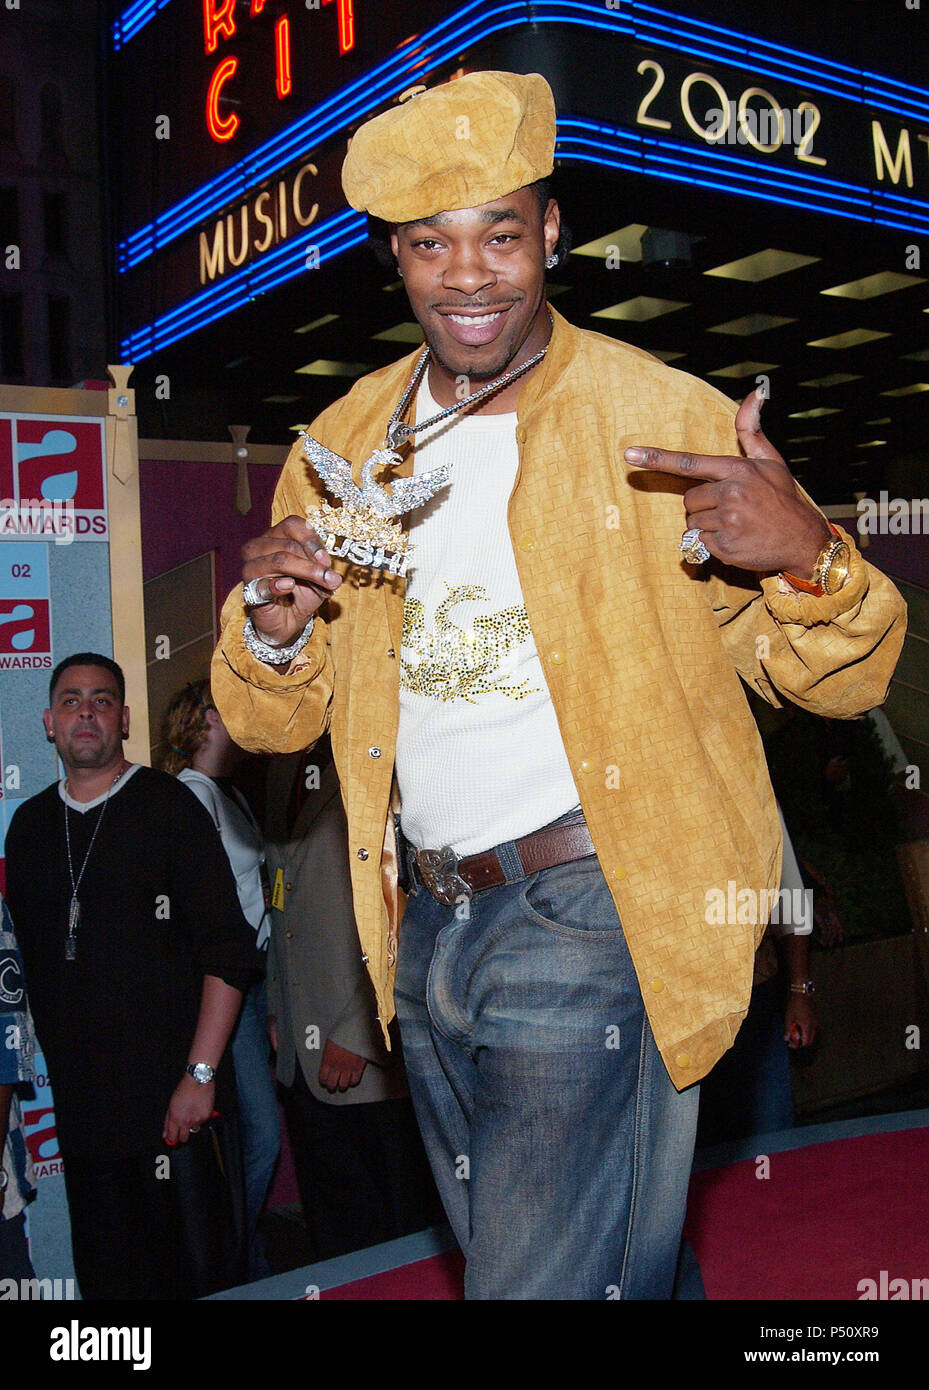 Busta Rhymes arriving at the 2002 MTV Video Music Awards at the Radio City  Music Hall in New York. August 29, 2002. - RhymesBusta02A.jpgRhymesBusta02A  Event in Hollywood Life - California, Red Carpet